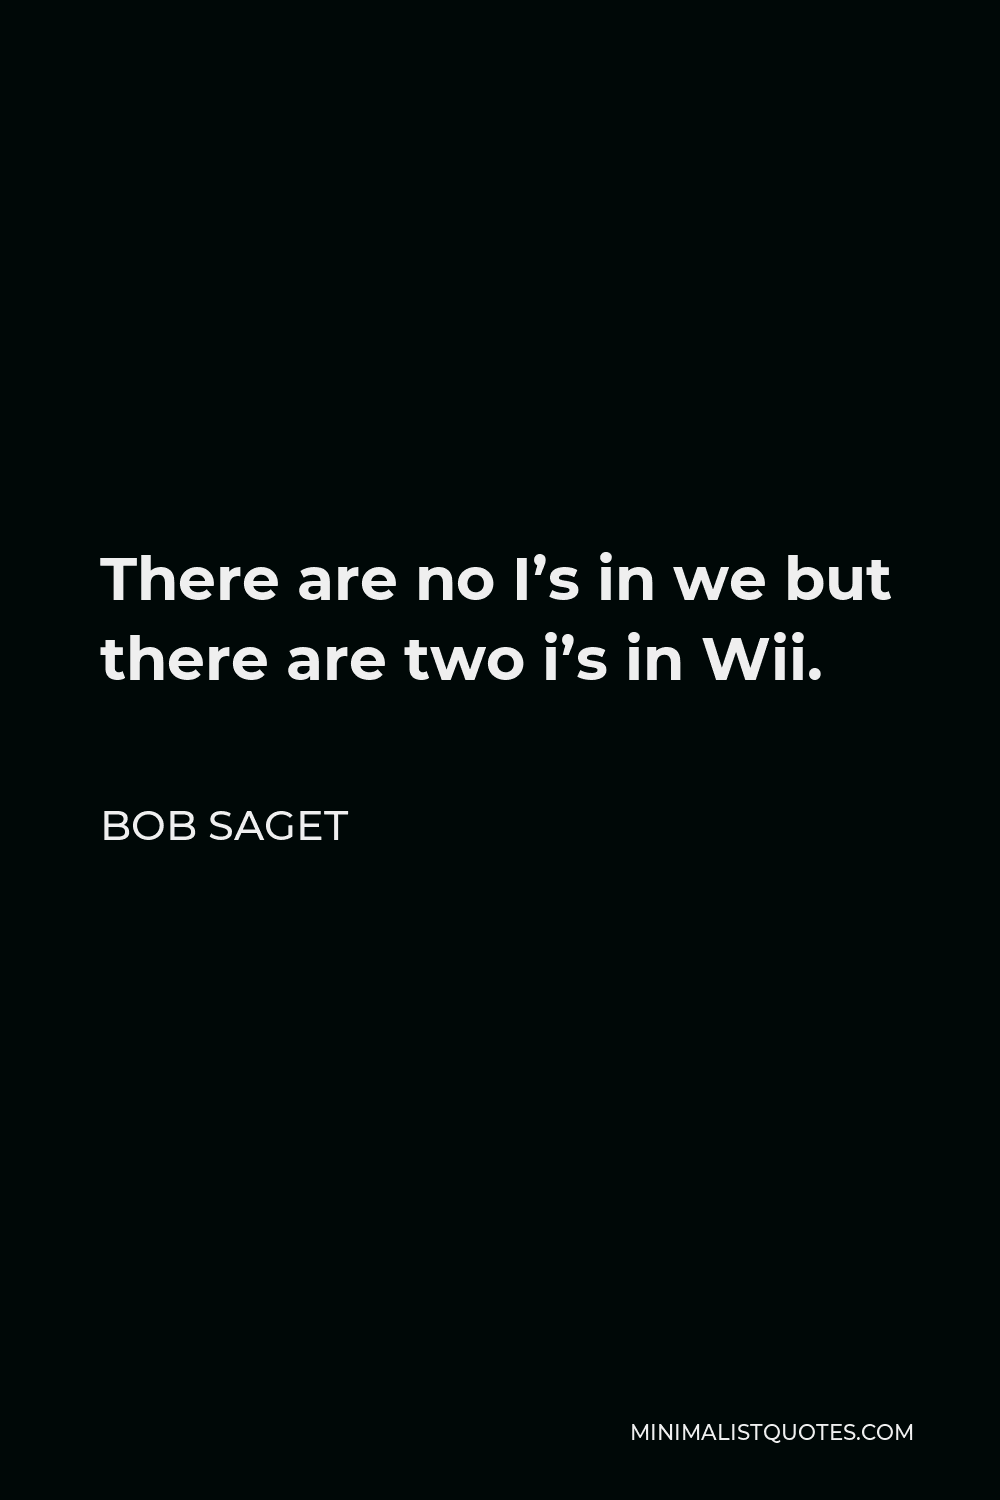 Bob Saget Quote - There are no I’s in we but there are two i’s in Wii.